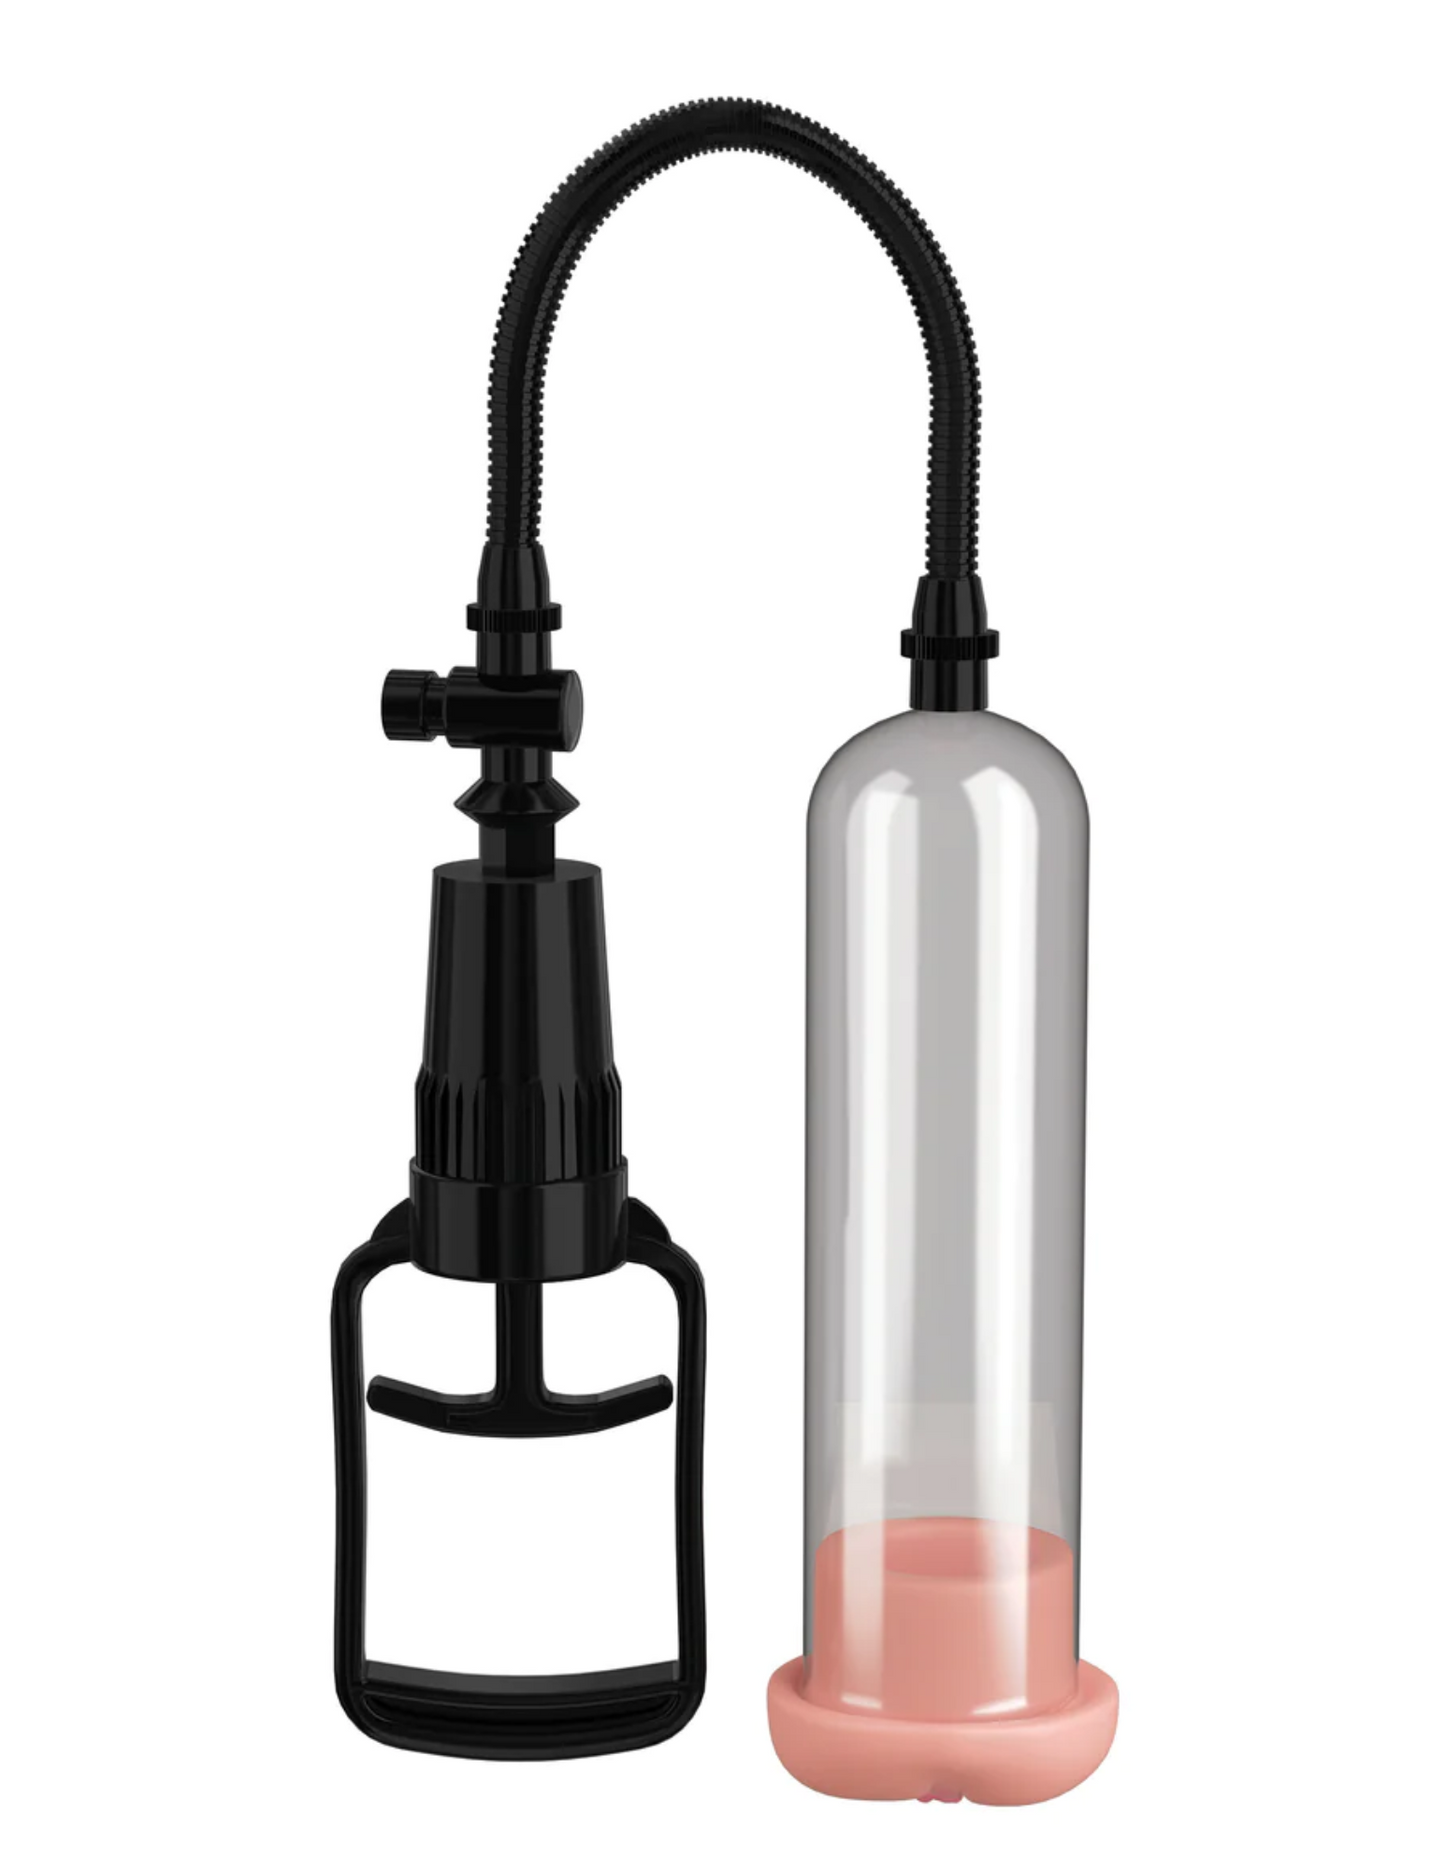 Photo of the Pump Worx Beginner's Pussy Pump Enlargement System from Pipedreams.